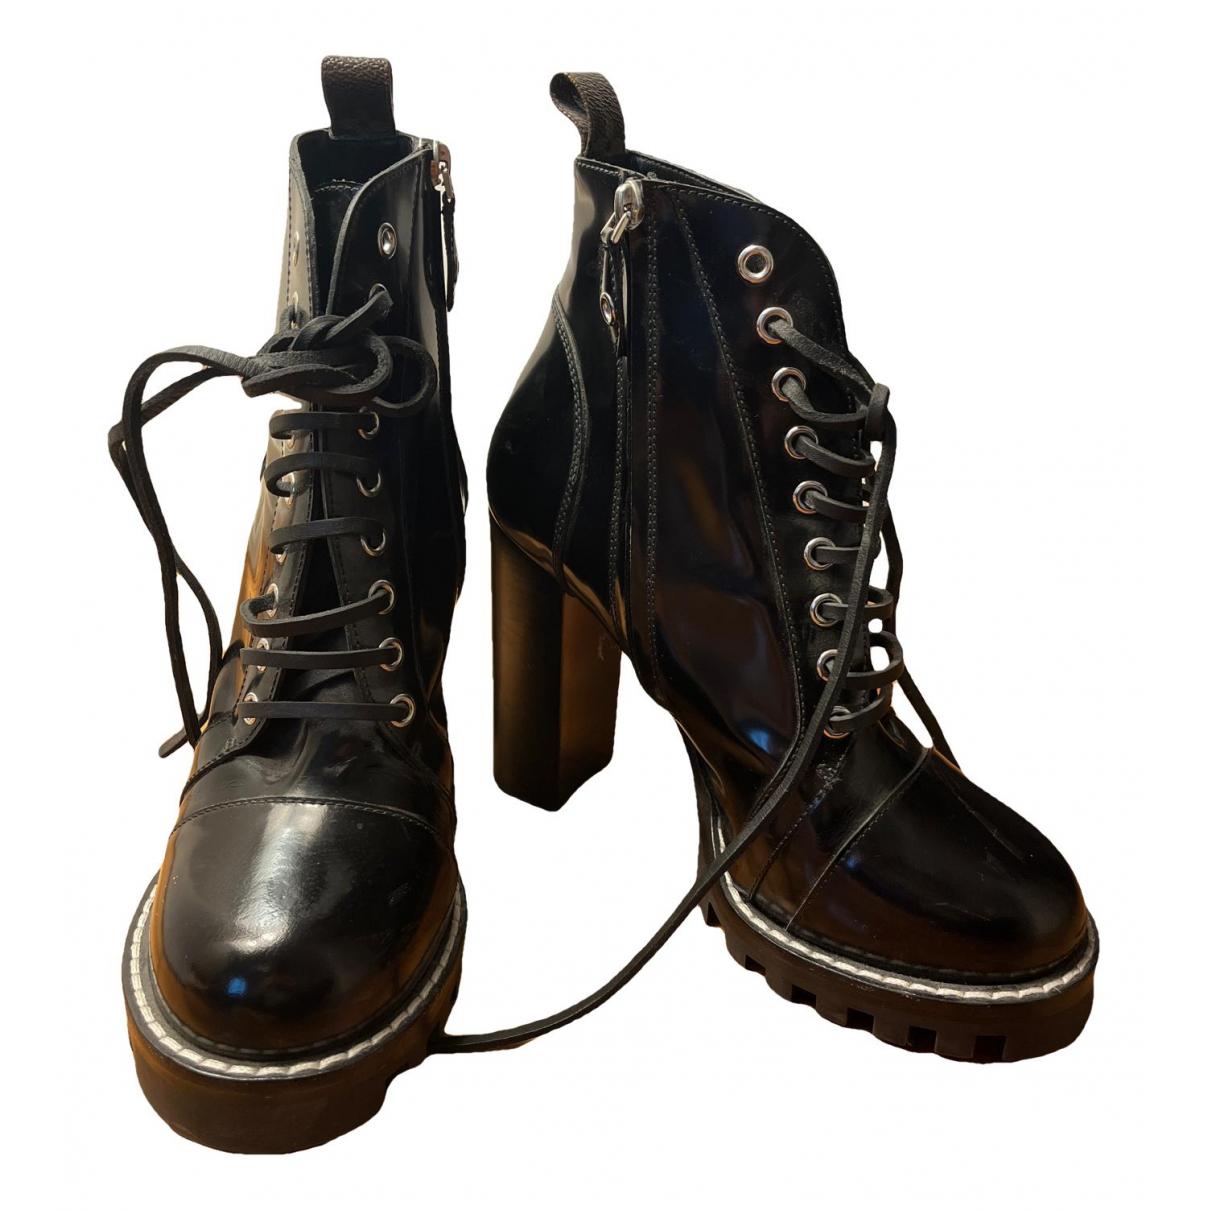 Star Trail Ankle Boots - Shoes 1AB2XW